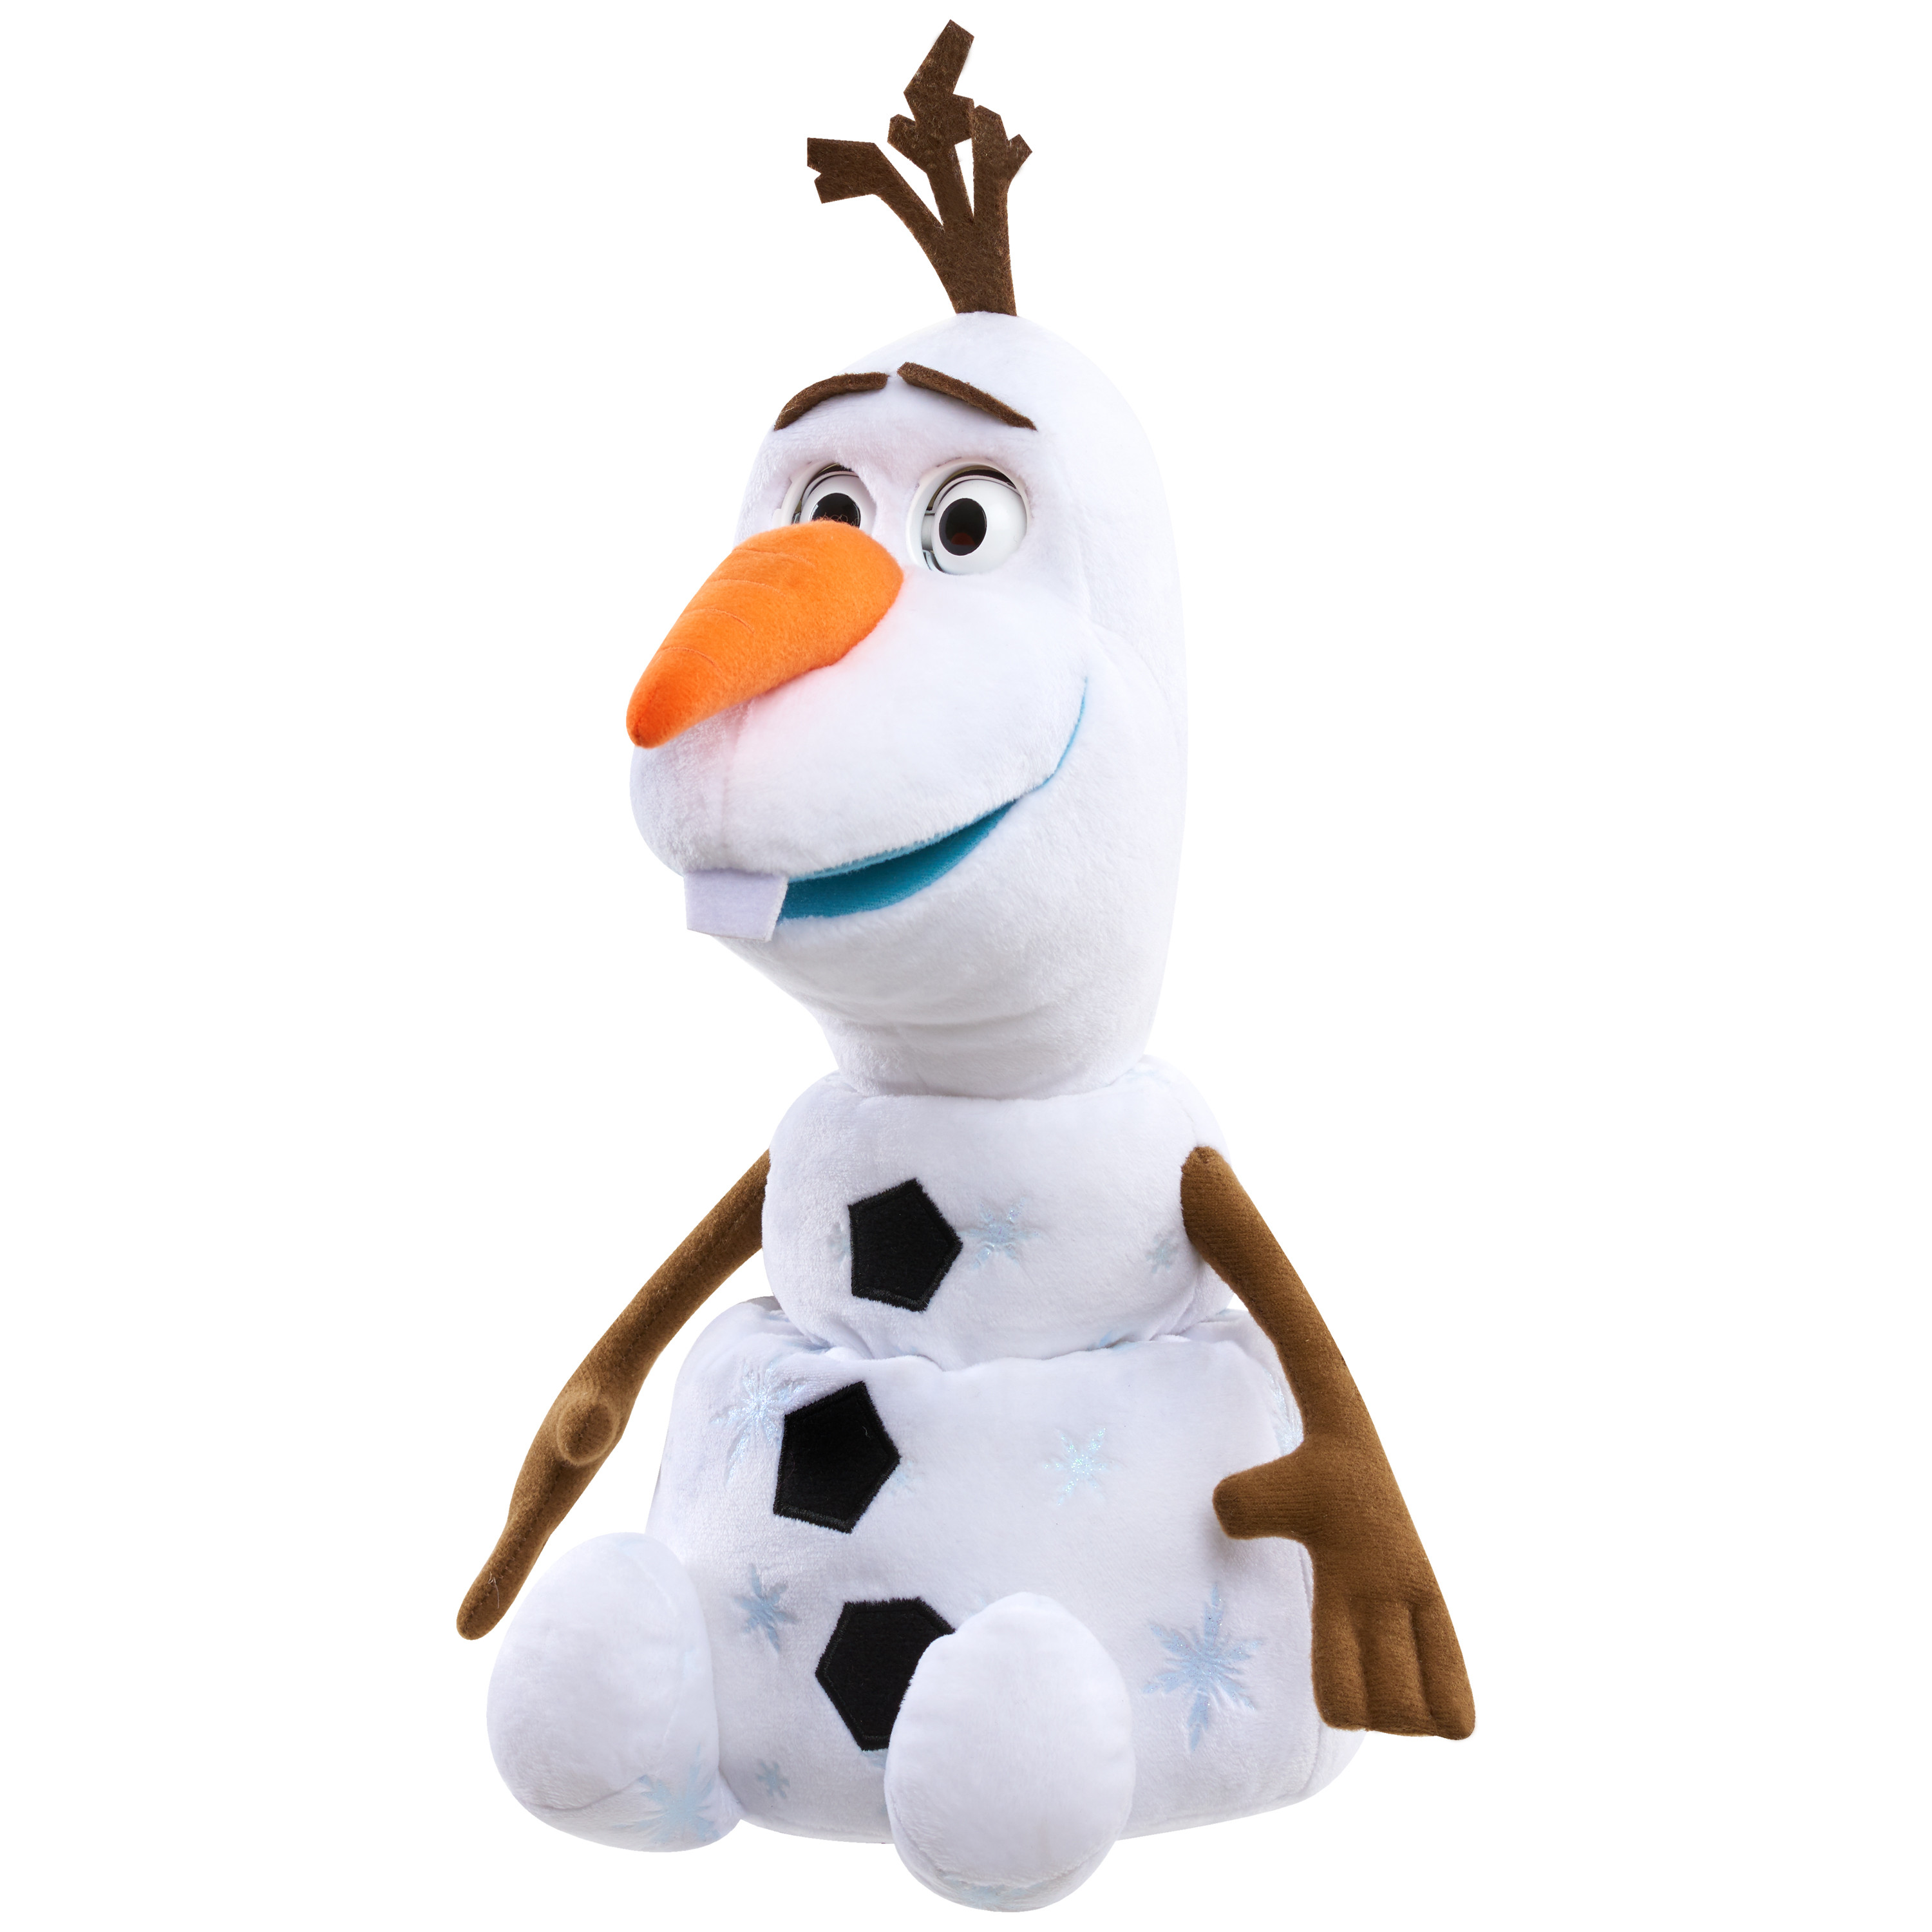 Disney Frozen 2 Spring & Surprise Olaf, Officially Licensed Kids Toys for Ages 3 Up, Gifts and Presents - image 4 of 4